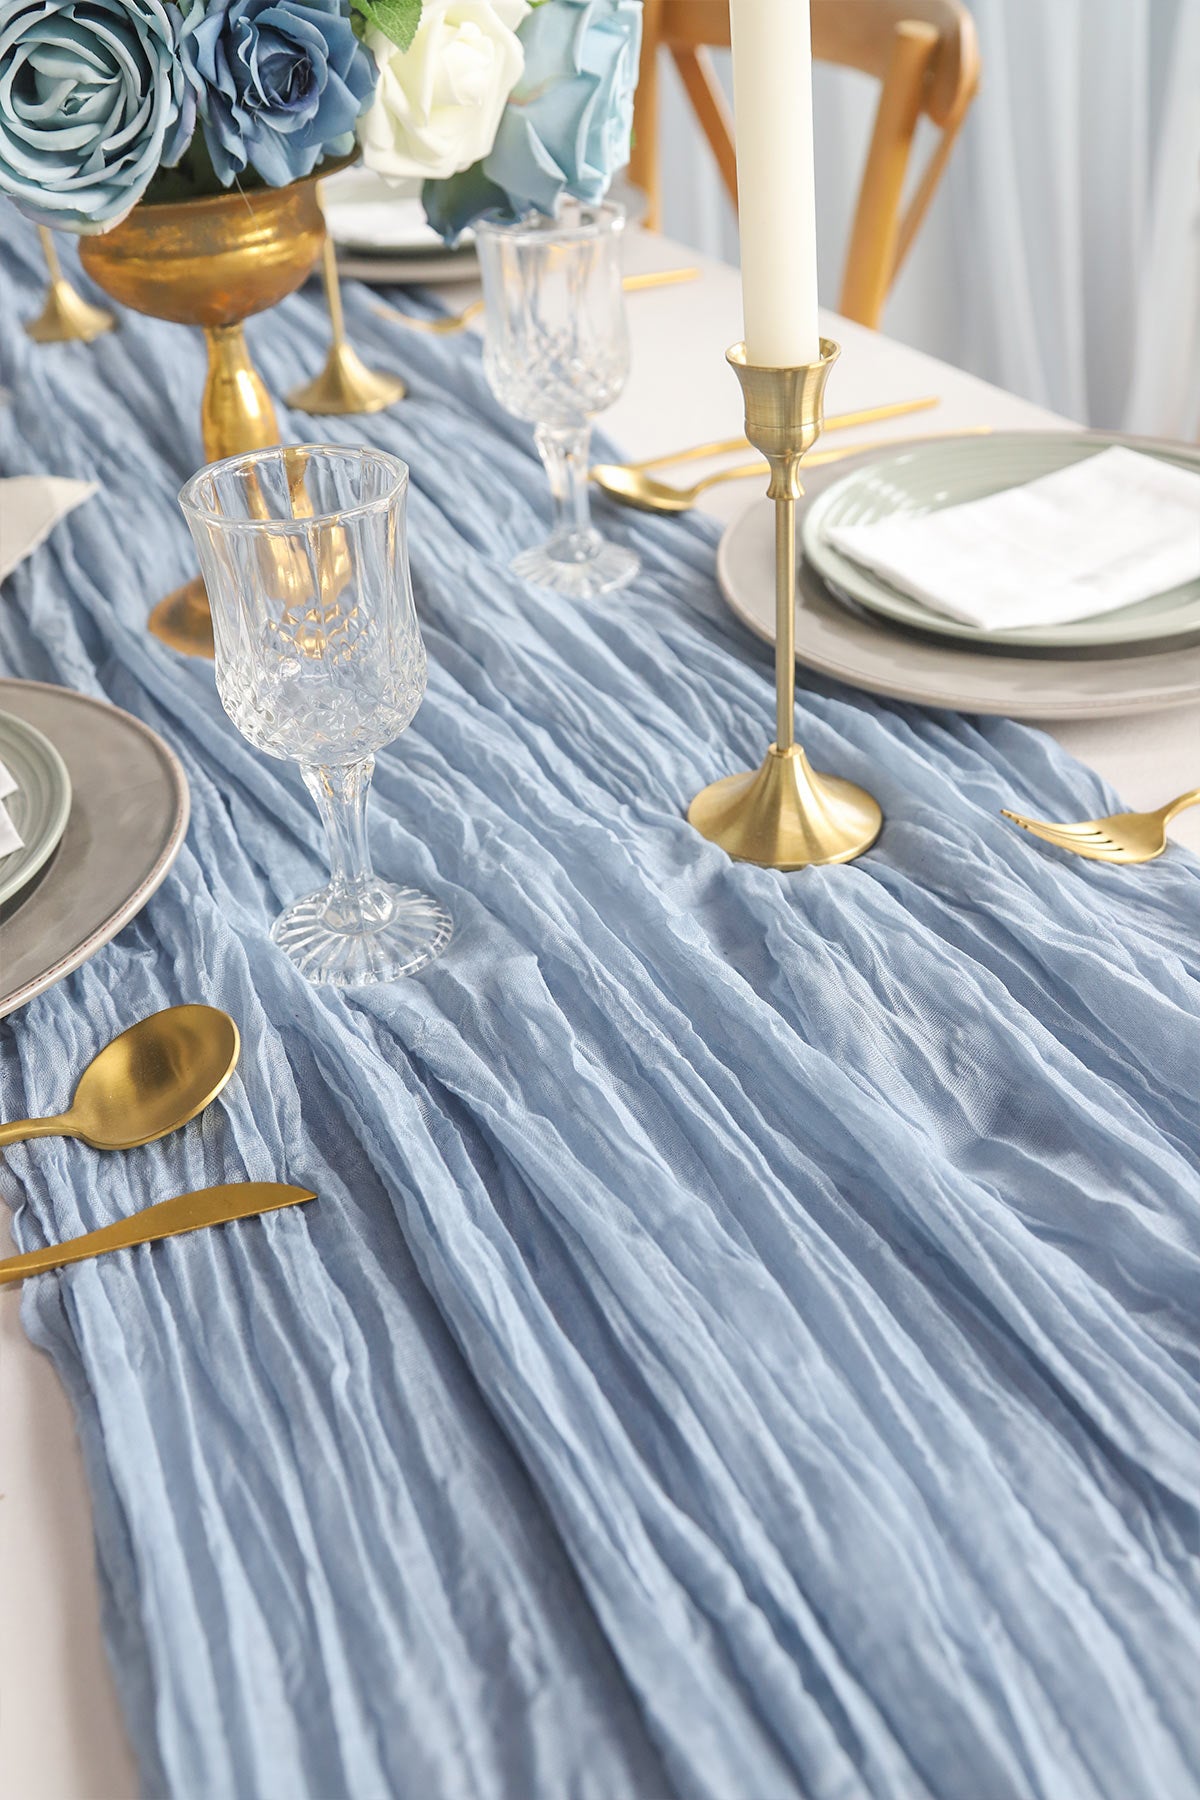 2 Pcs Cheesecloth Table Runner - Dusty Blue